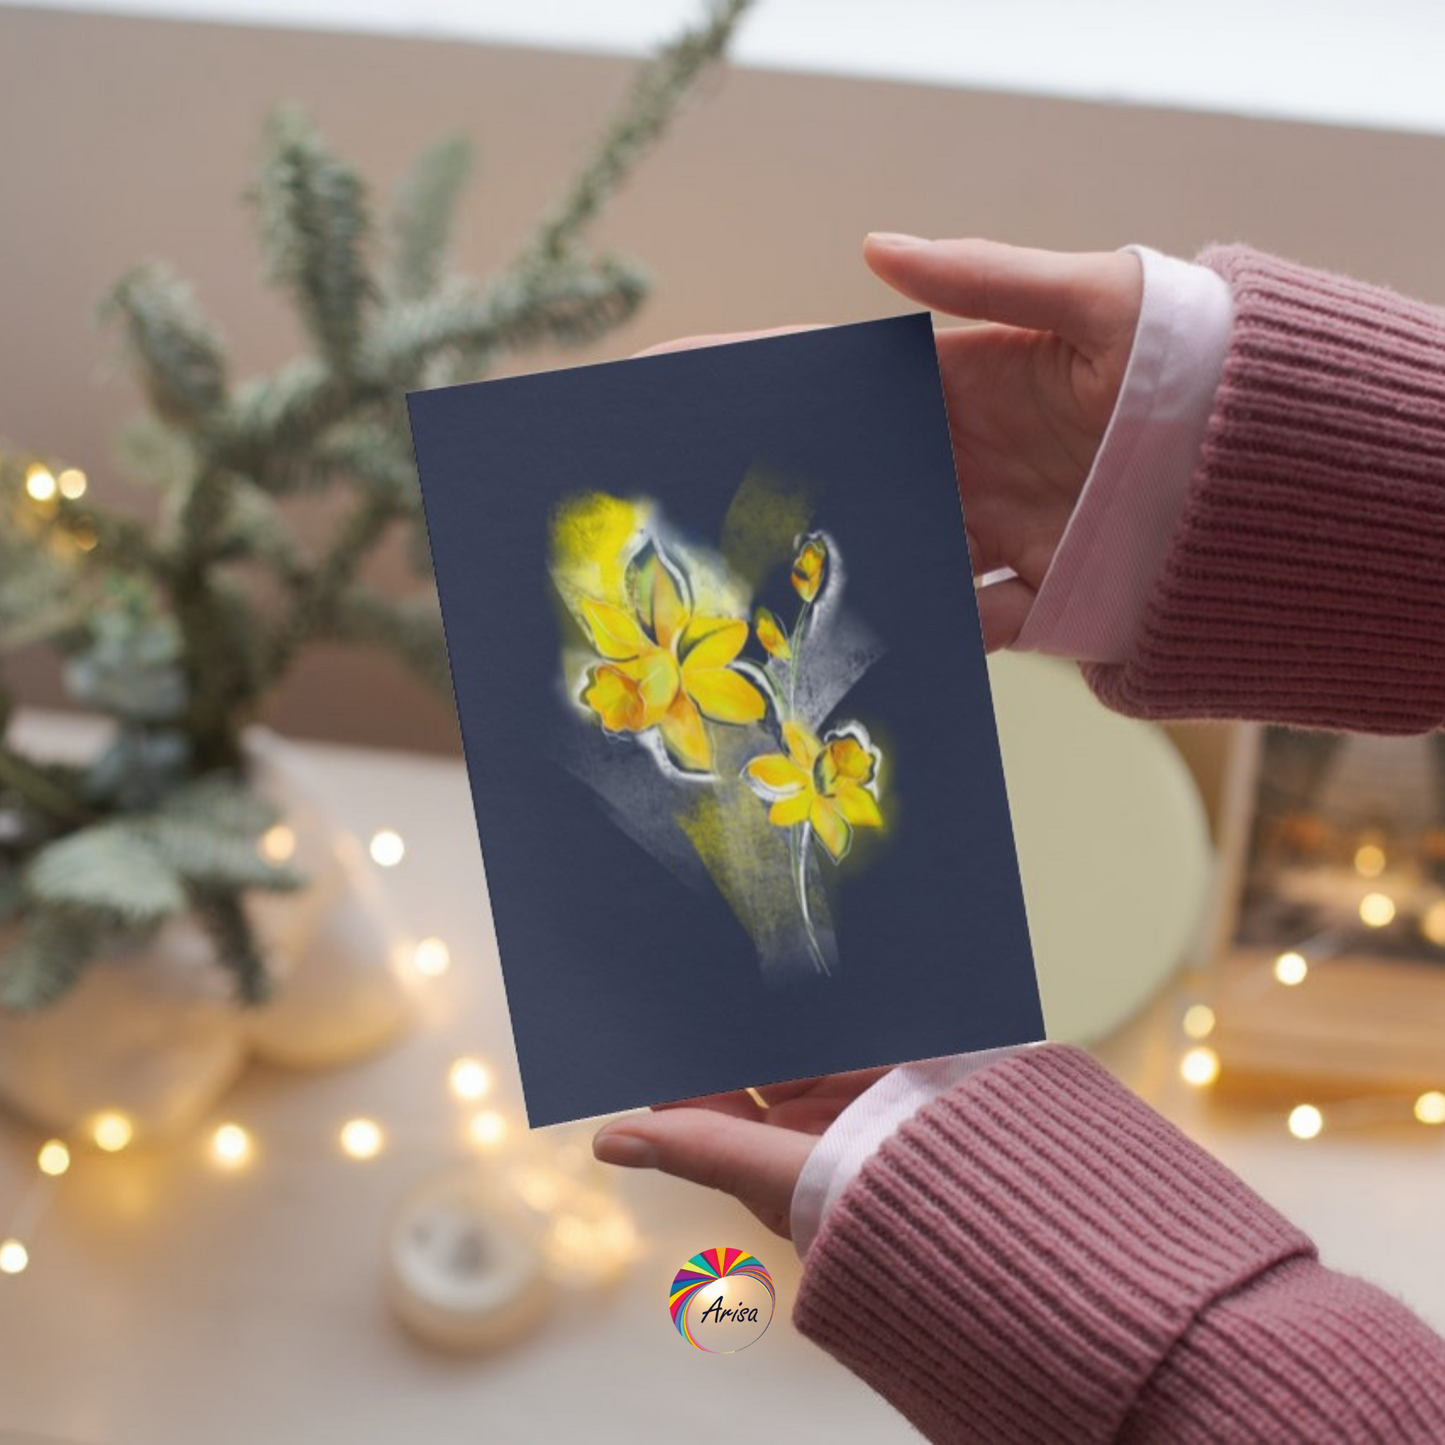 "DAFFODIL" Greeting Card by ArisaTeam in the hands of a woman ideal as a Christmas card.